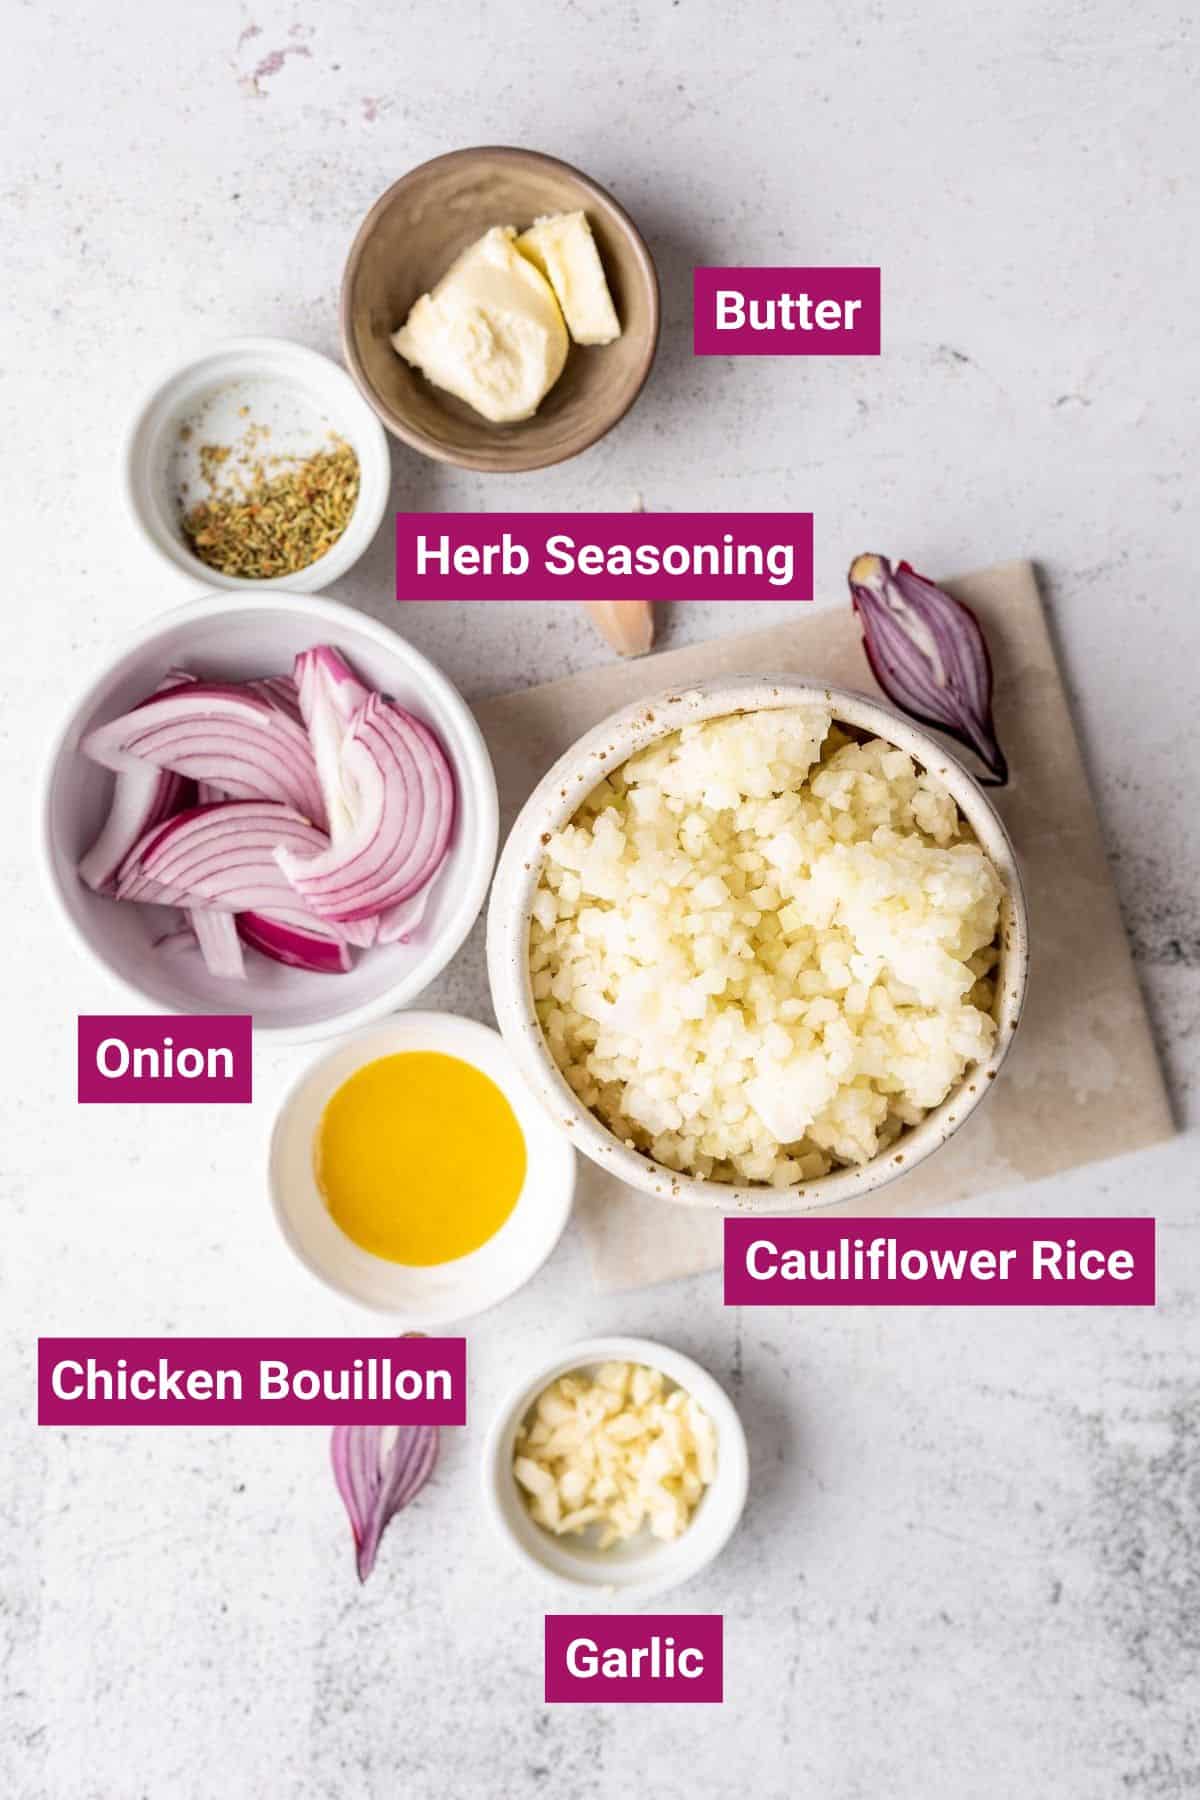 Cauliflower Rice, red onions, Herb Seasoning Chicken, Bouillon, Butter on separate bowls